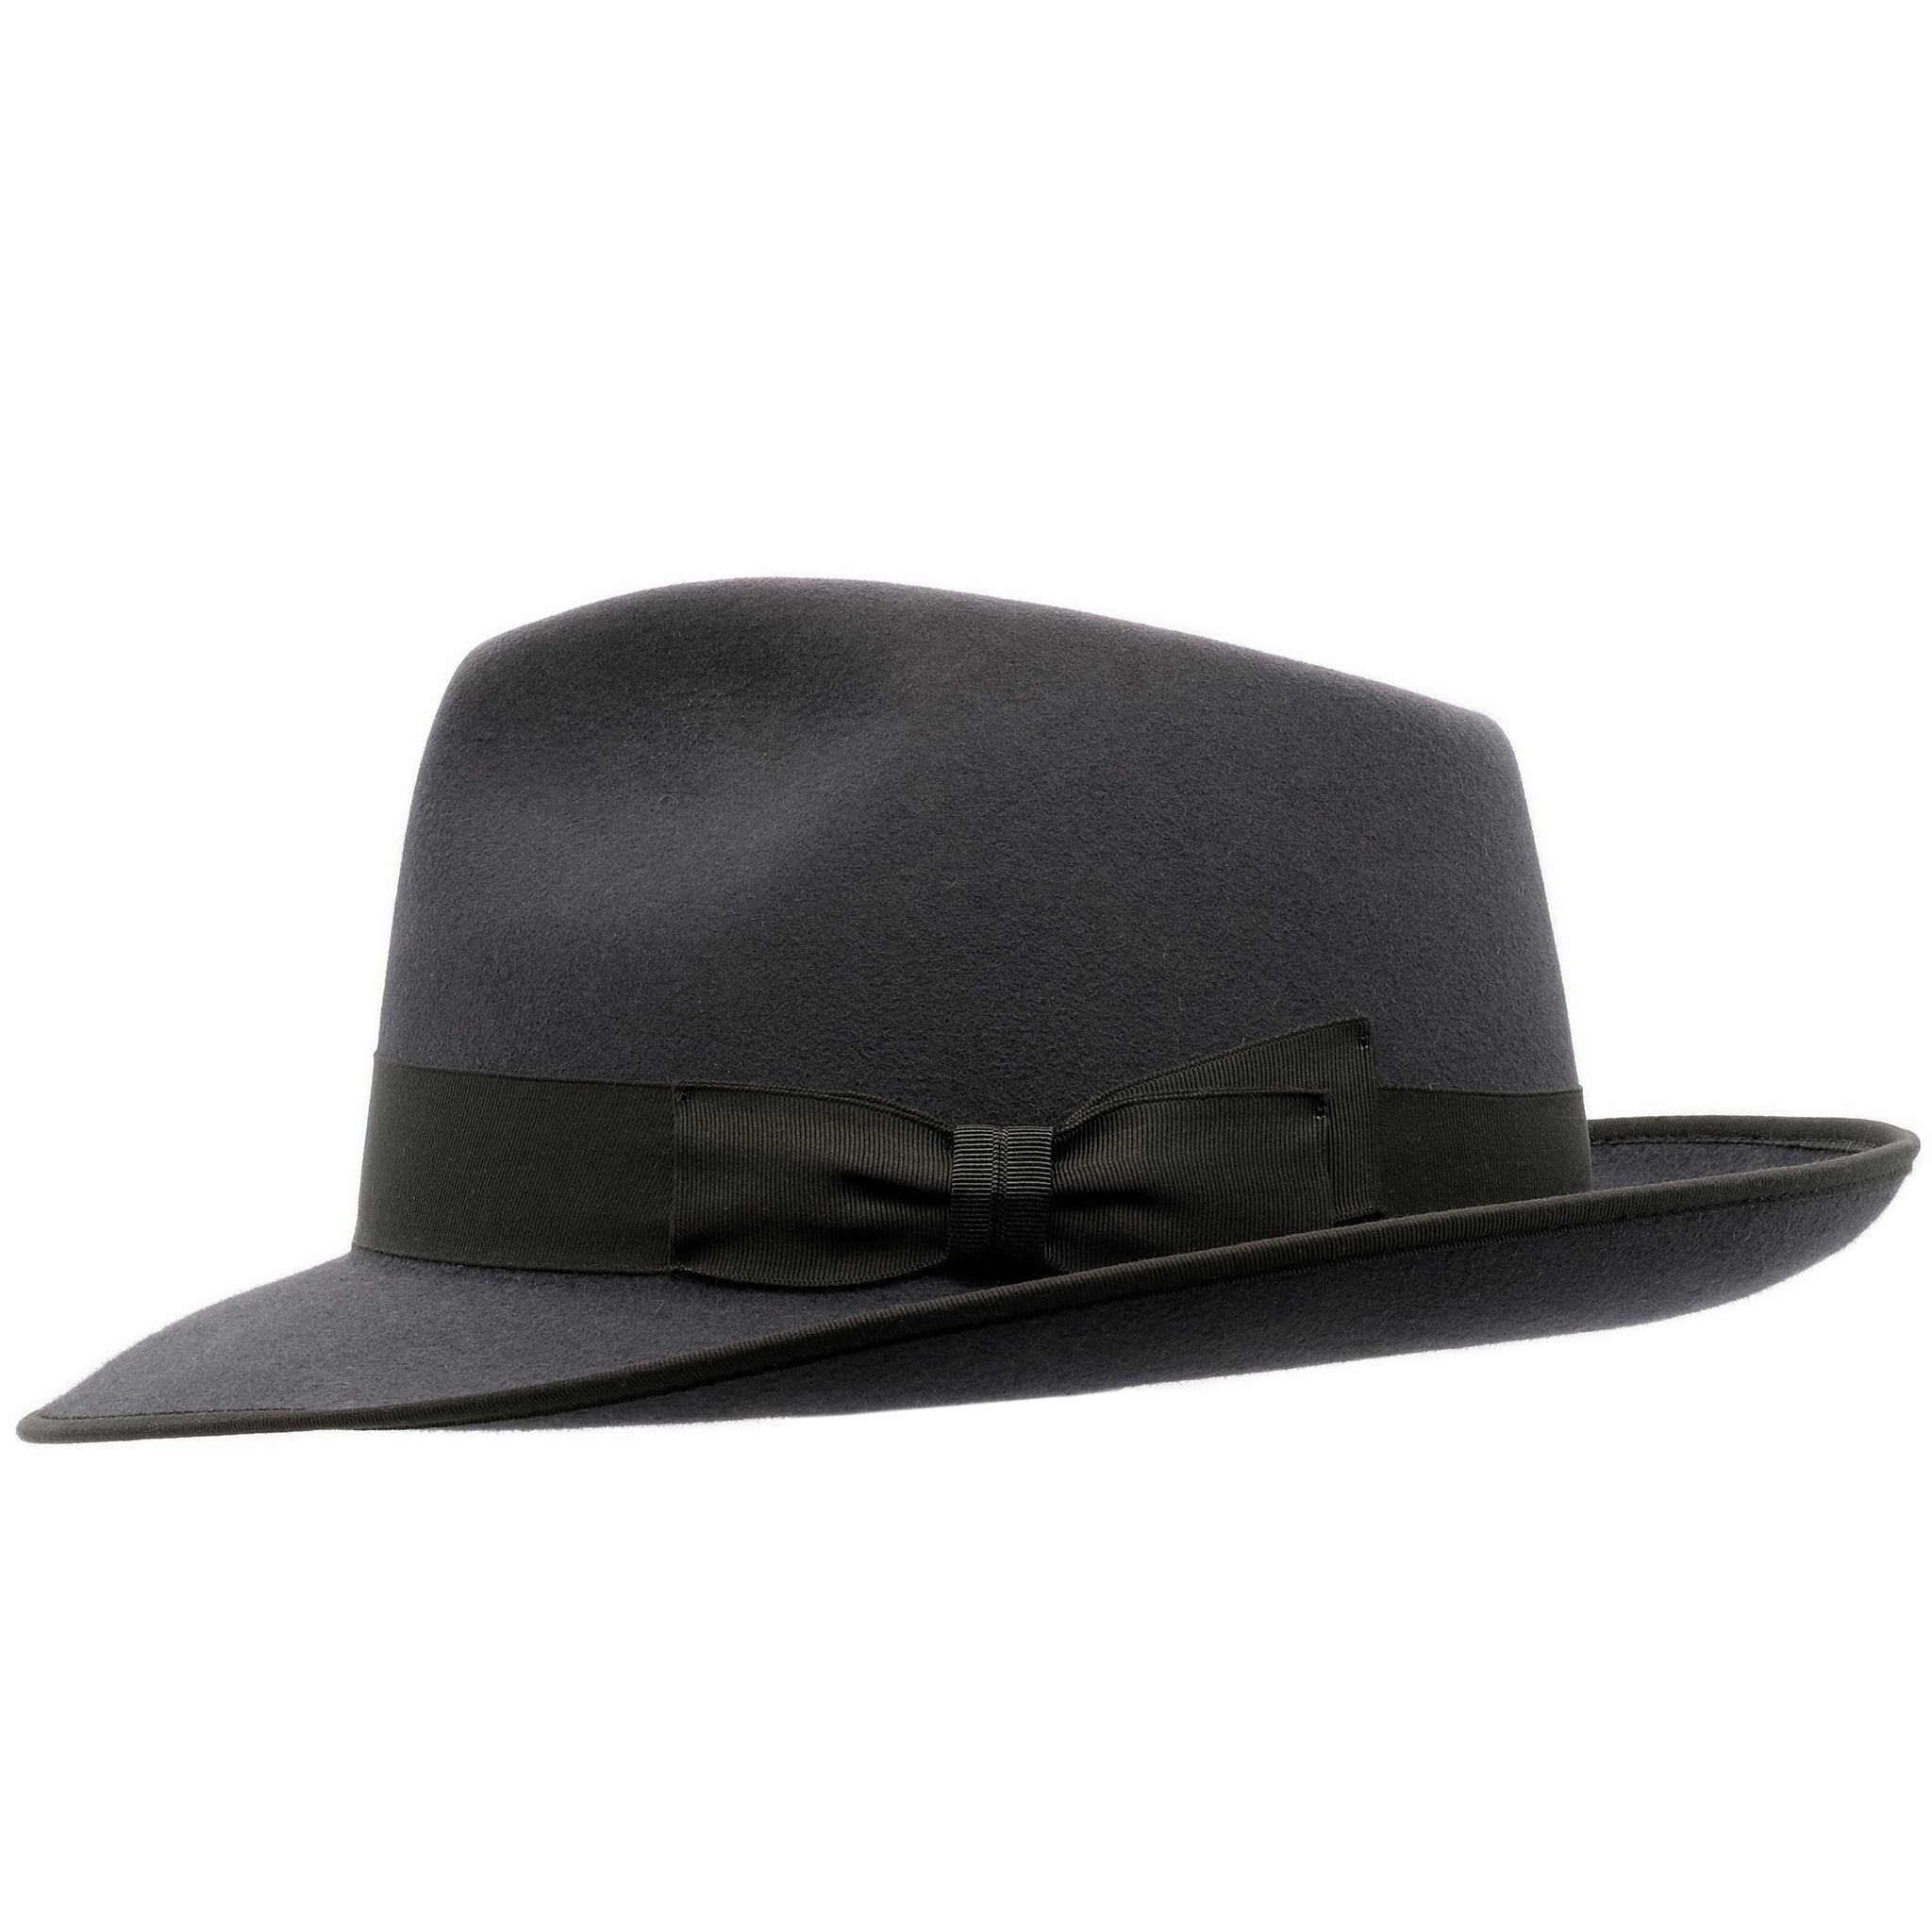 side view of Akubra Stylemaster hat in Carbon Grey colour